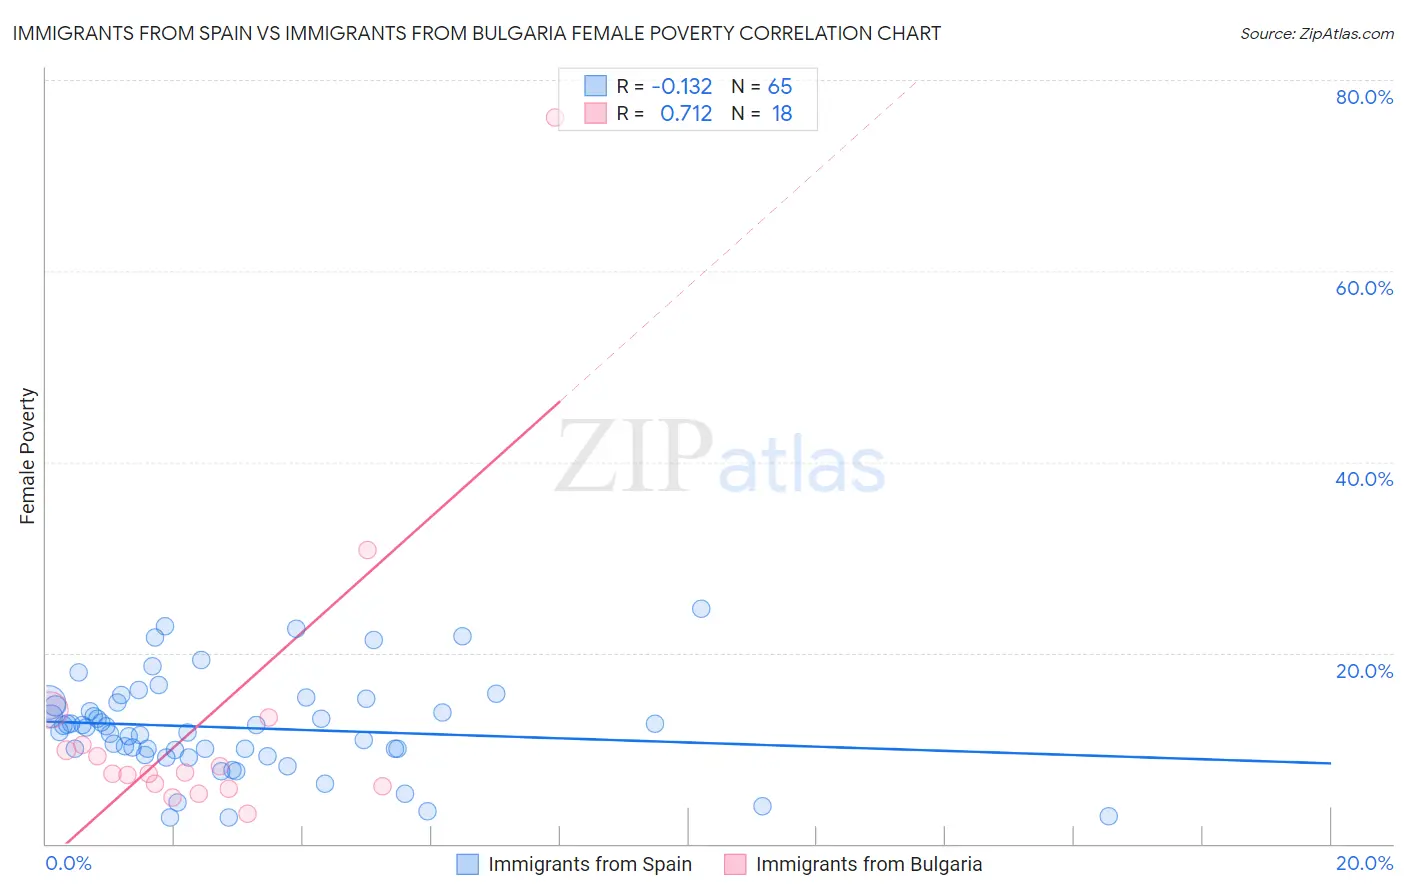 Immigrants from Spain vs Immigrants from Bulgaria Female Poverty